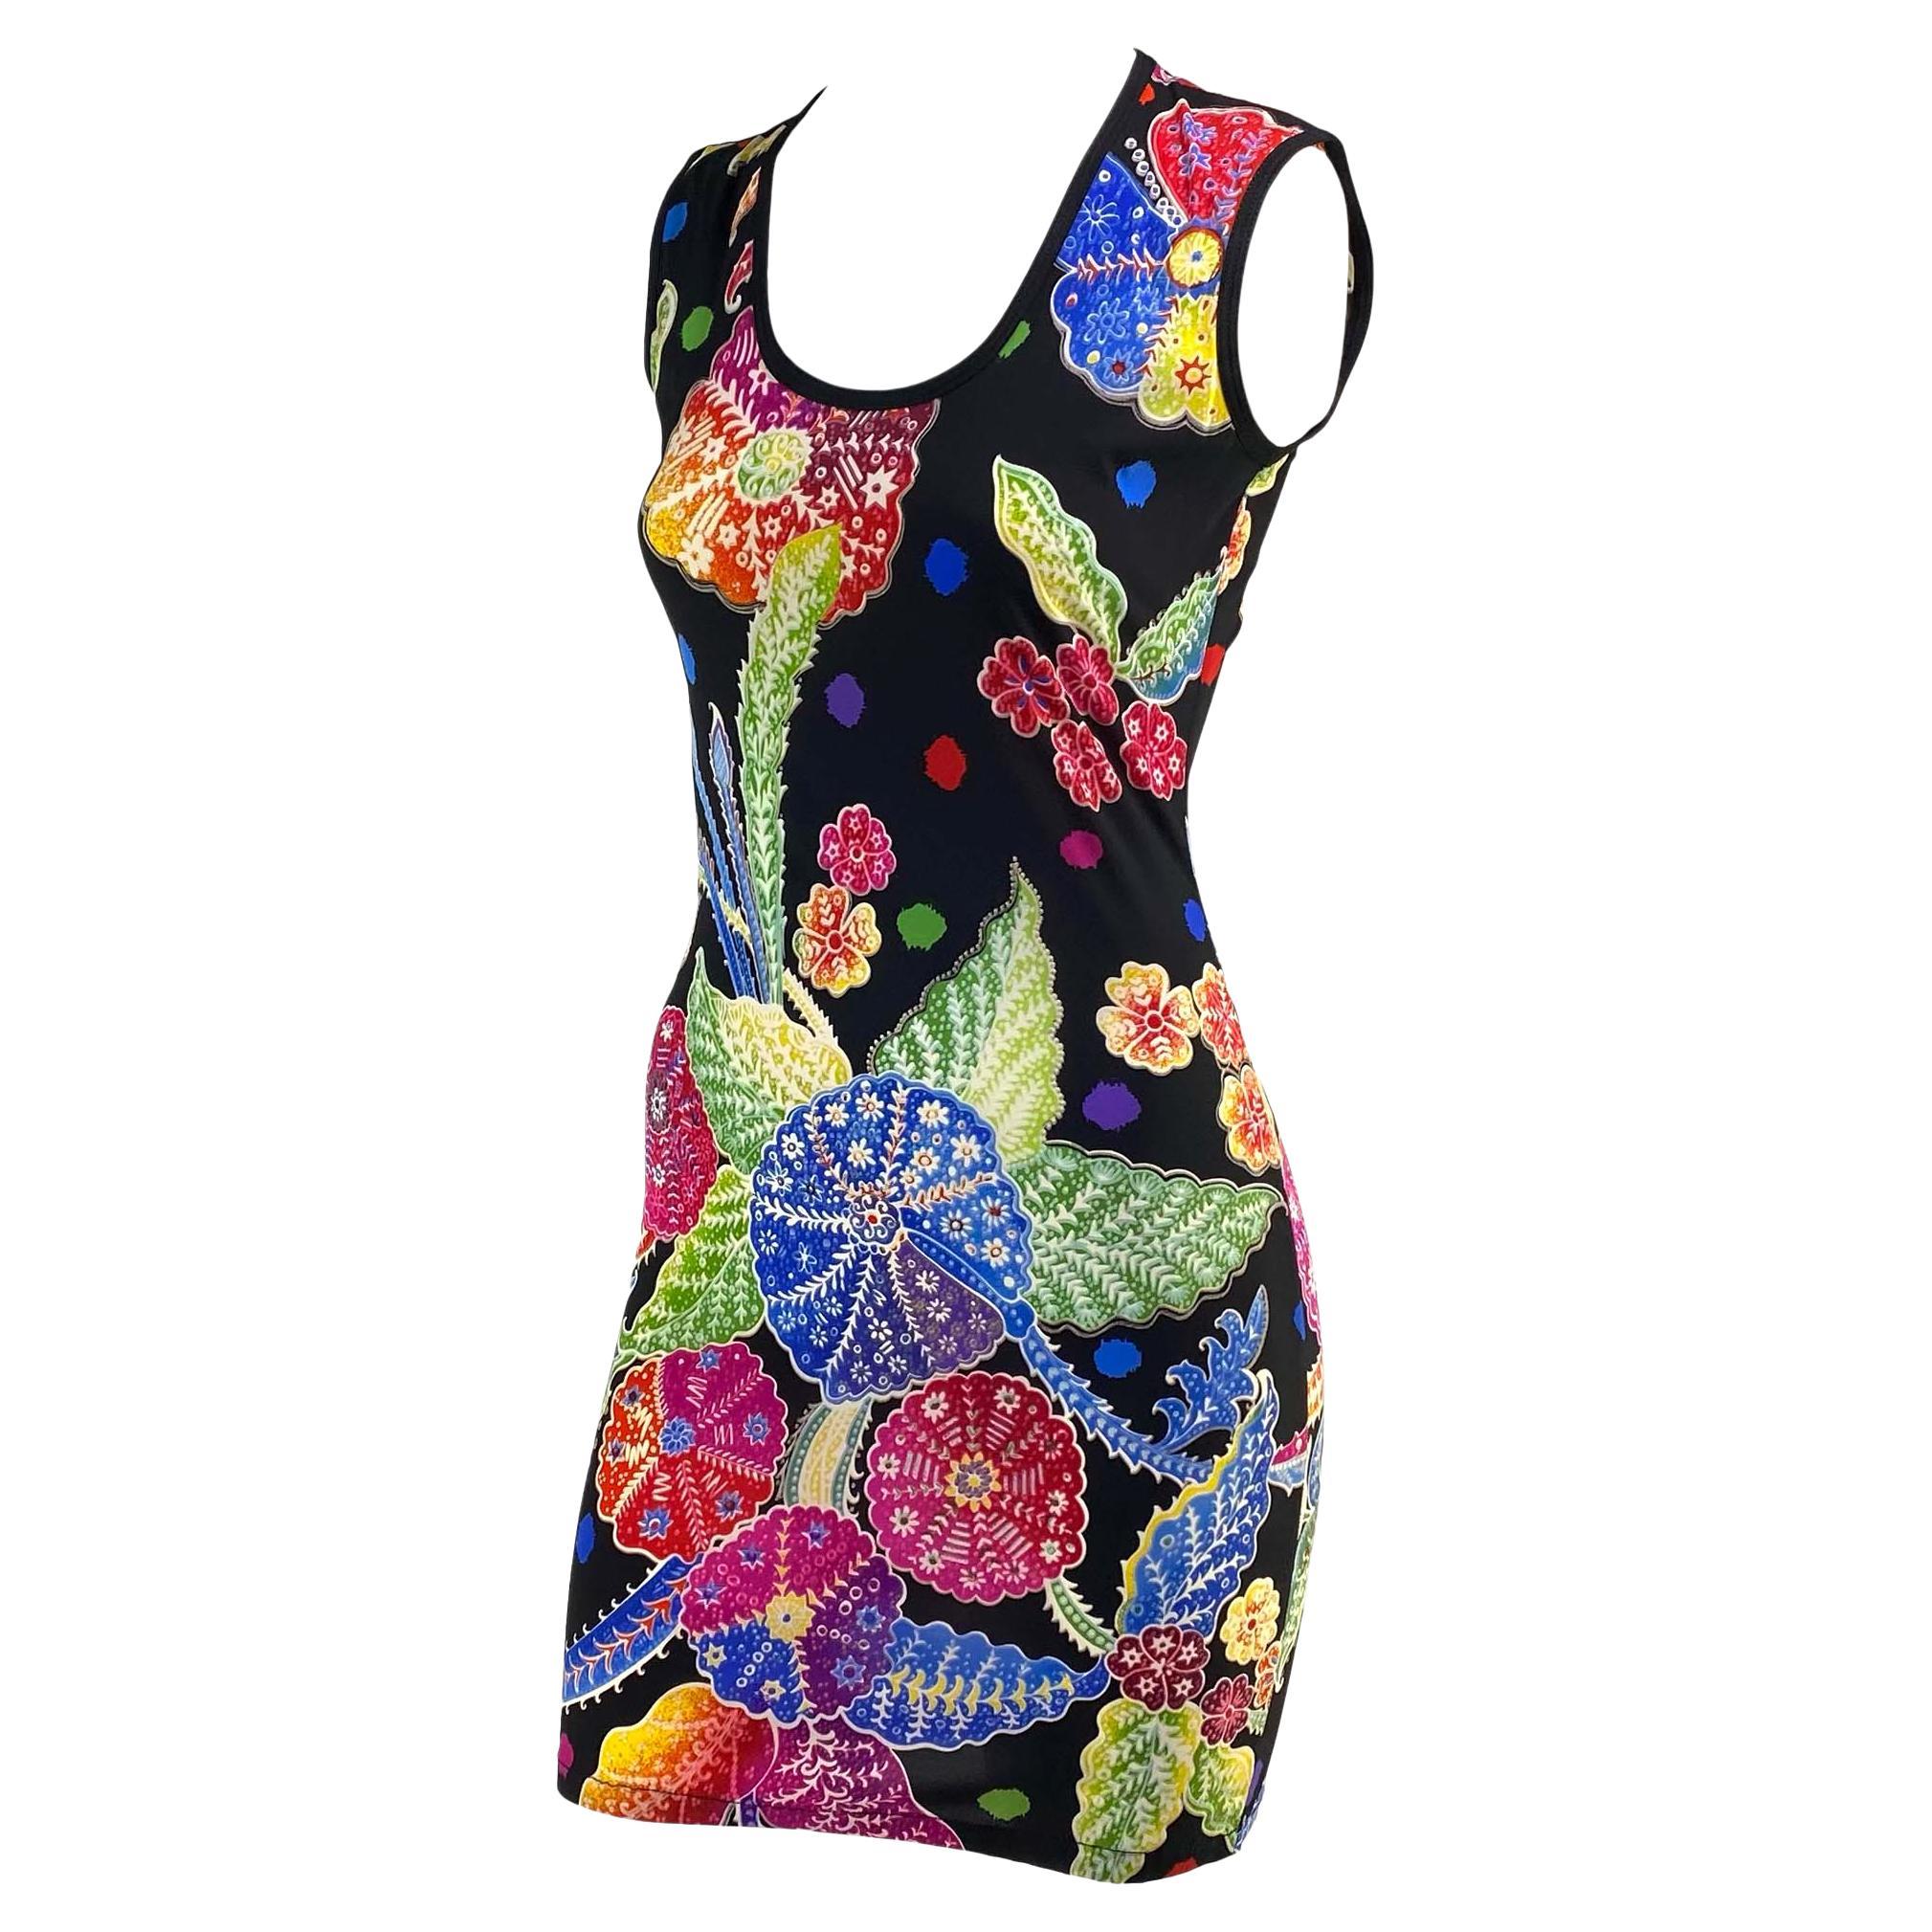 F/W 1993 Gianni Versace Couture Black Multicolor Floral Stretch Sleeveless Dress